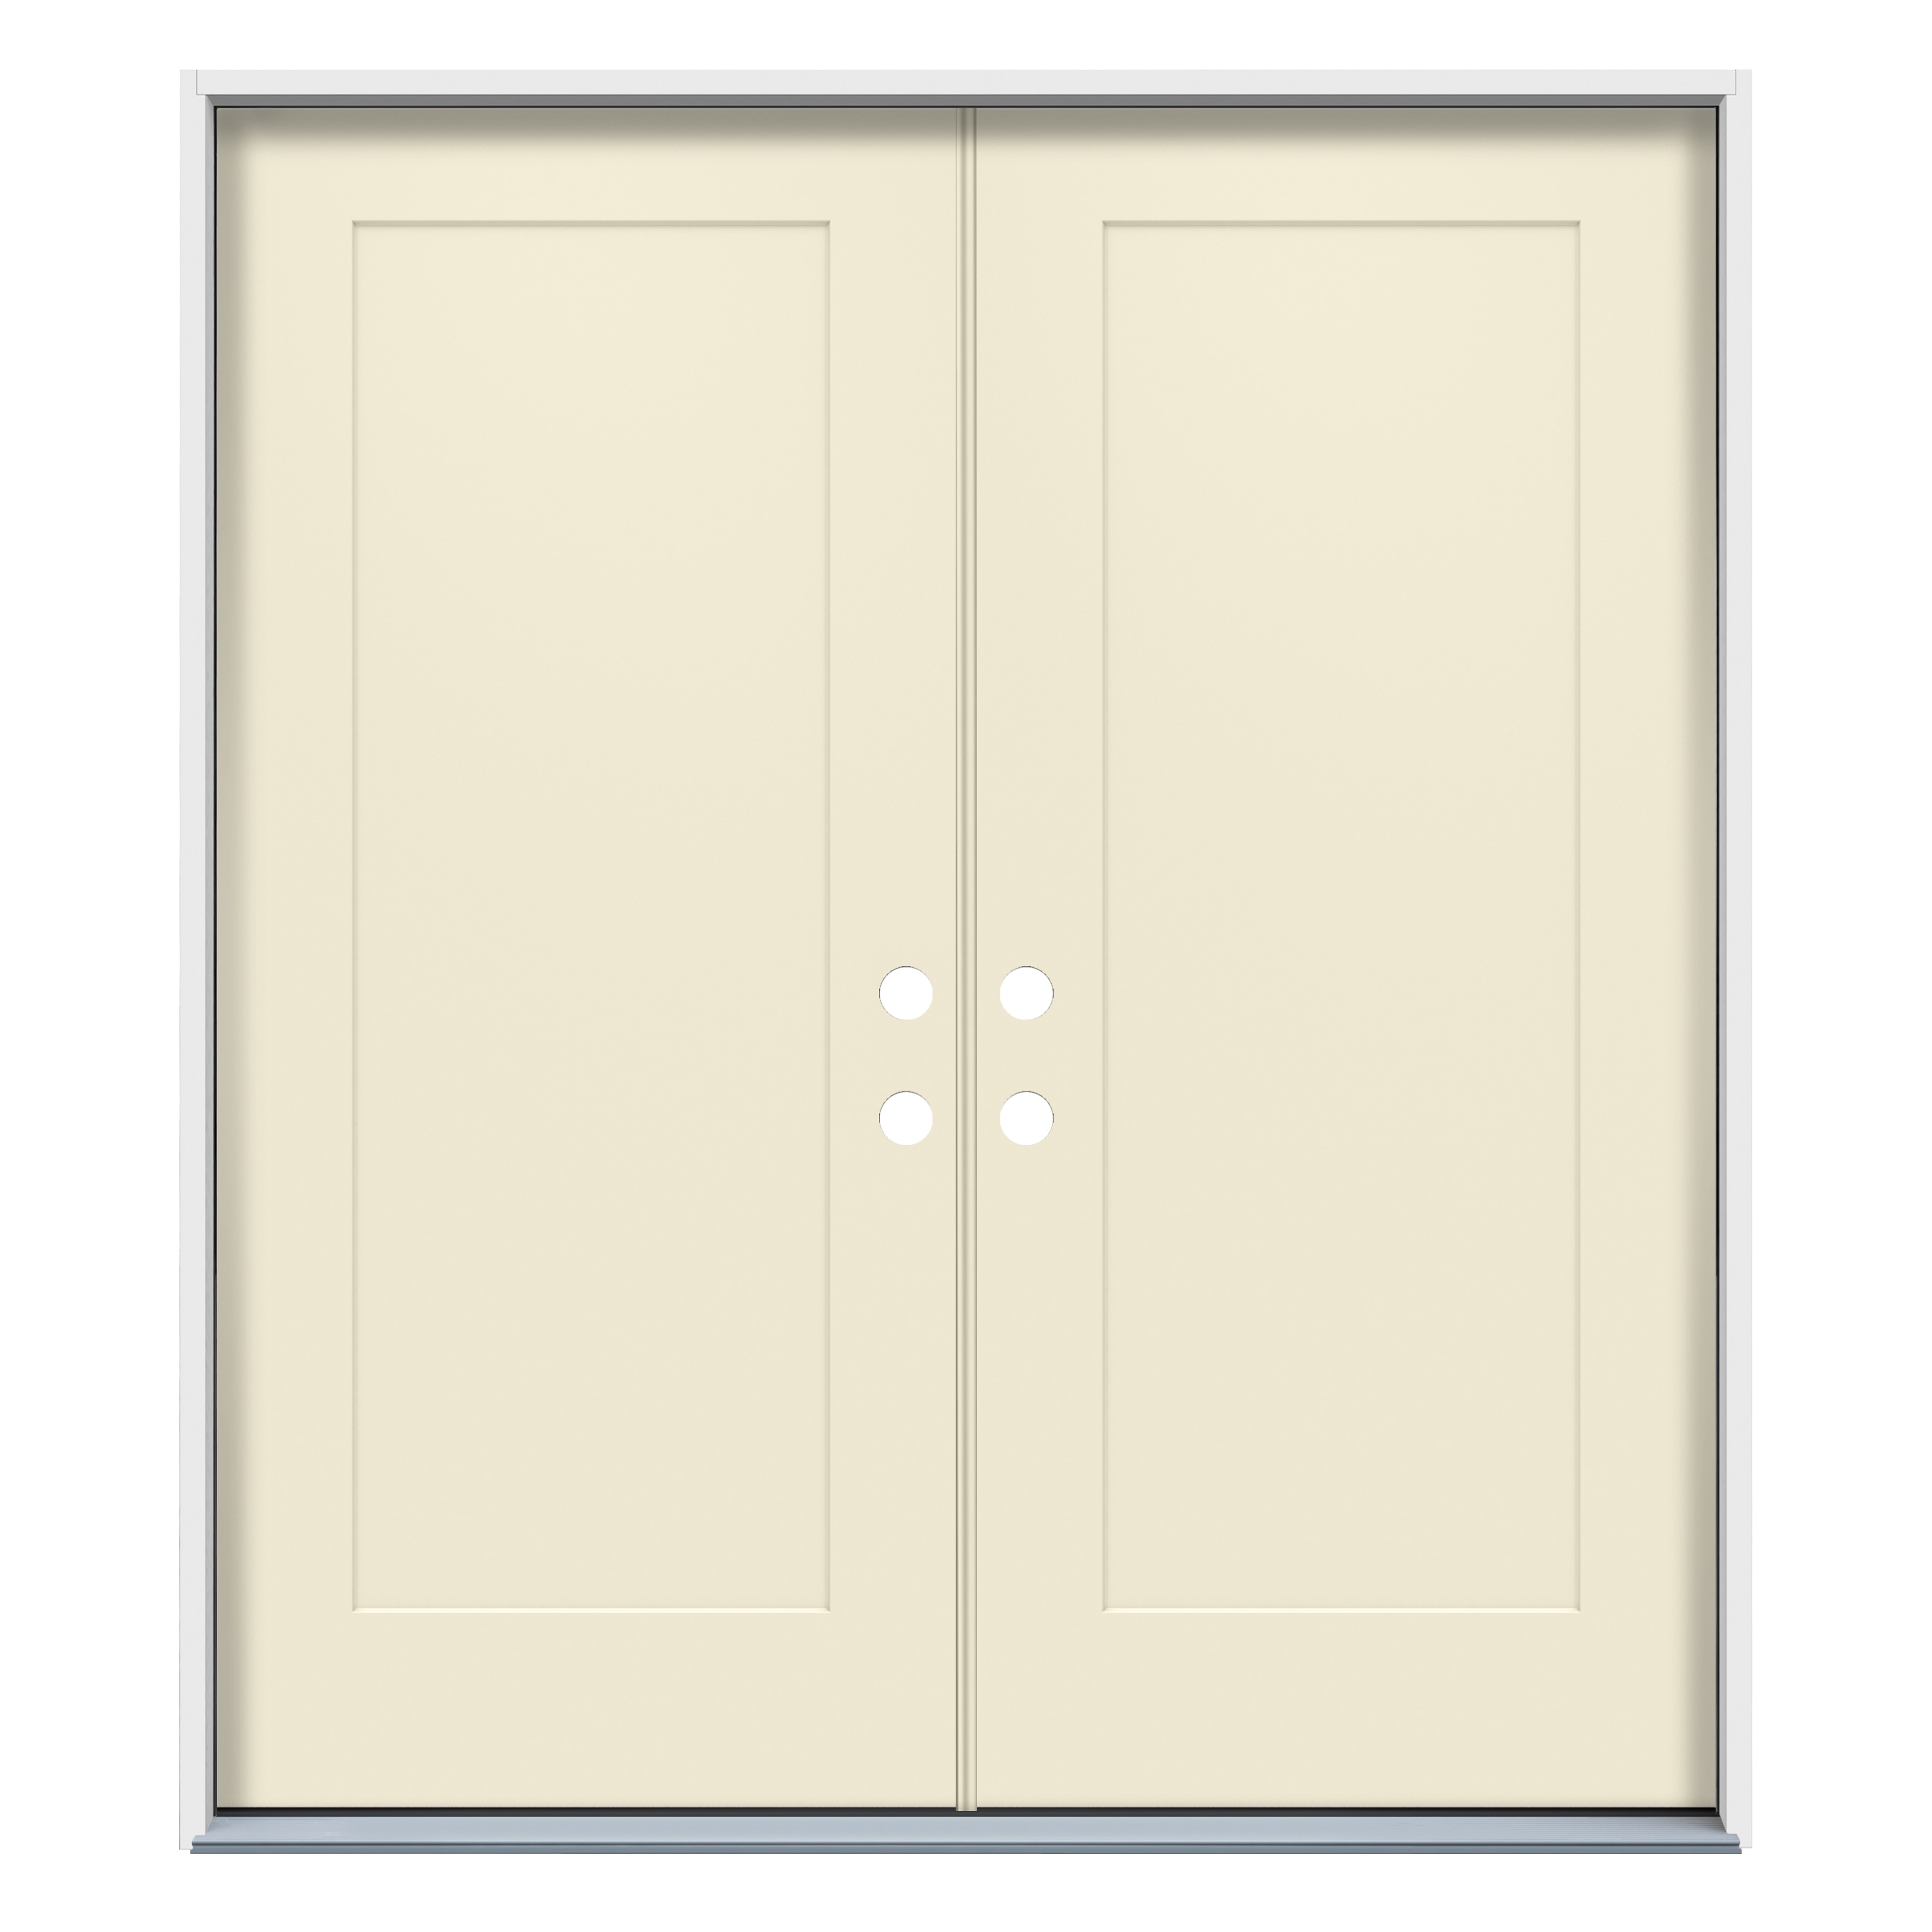 American Building Supply 64-in x 80-in Steel Right-Hand Inswing Bisque Paint Painted Prehung Double Front Door Insulating Core in Off-White -  LO1049560